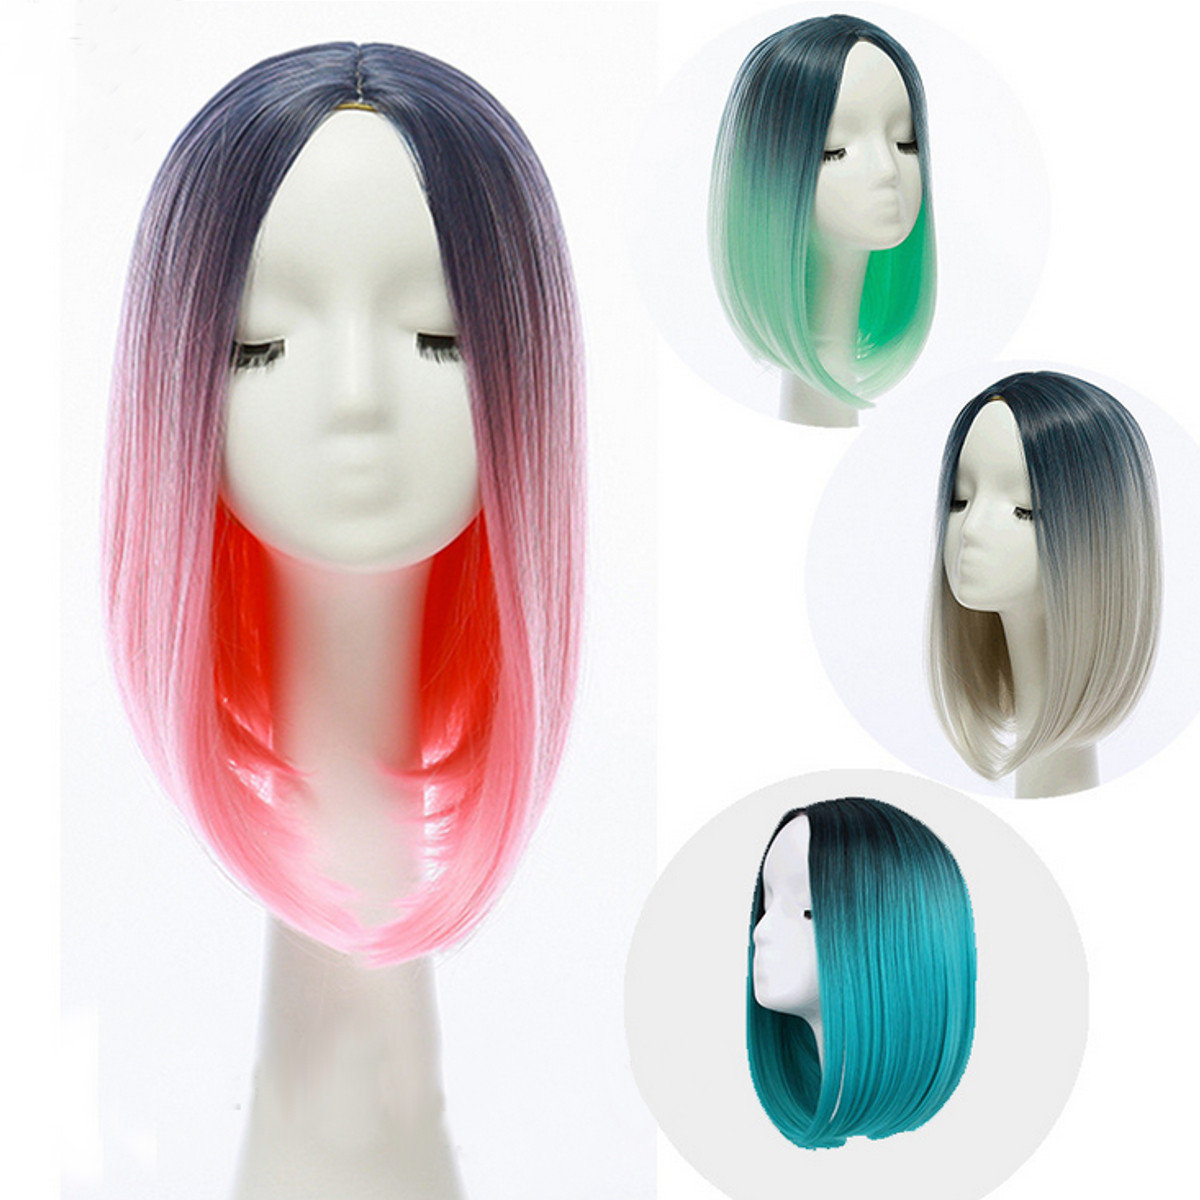 

36cm Gradient Hair Straight Bob Wigs Heat Resistant Synthetic 4 Colors, Black/red/green black/red/blue black/green/red black/white